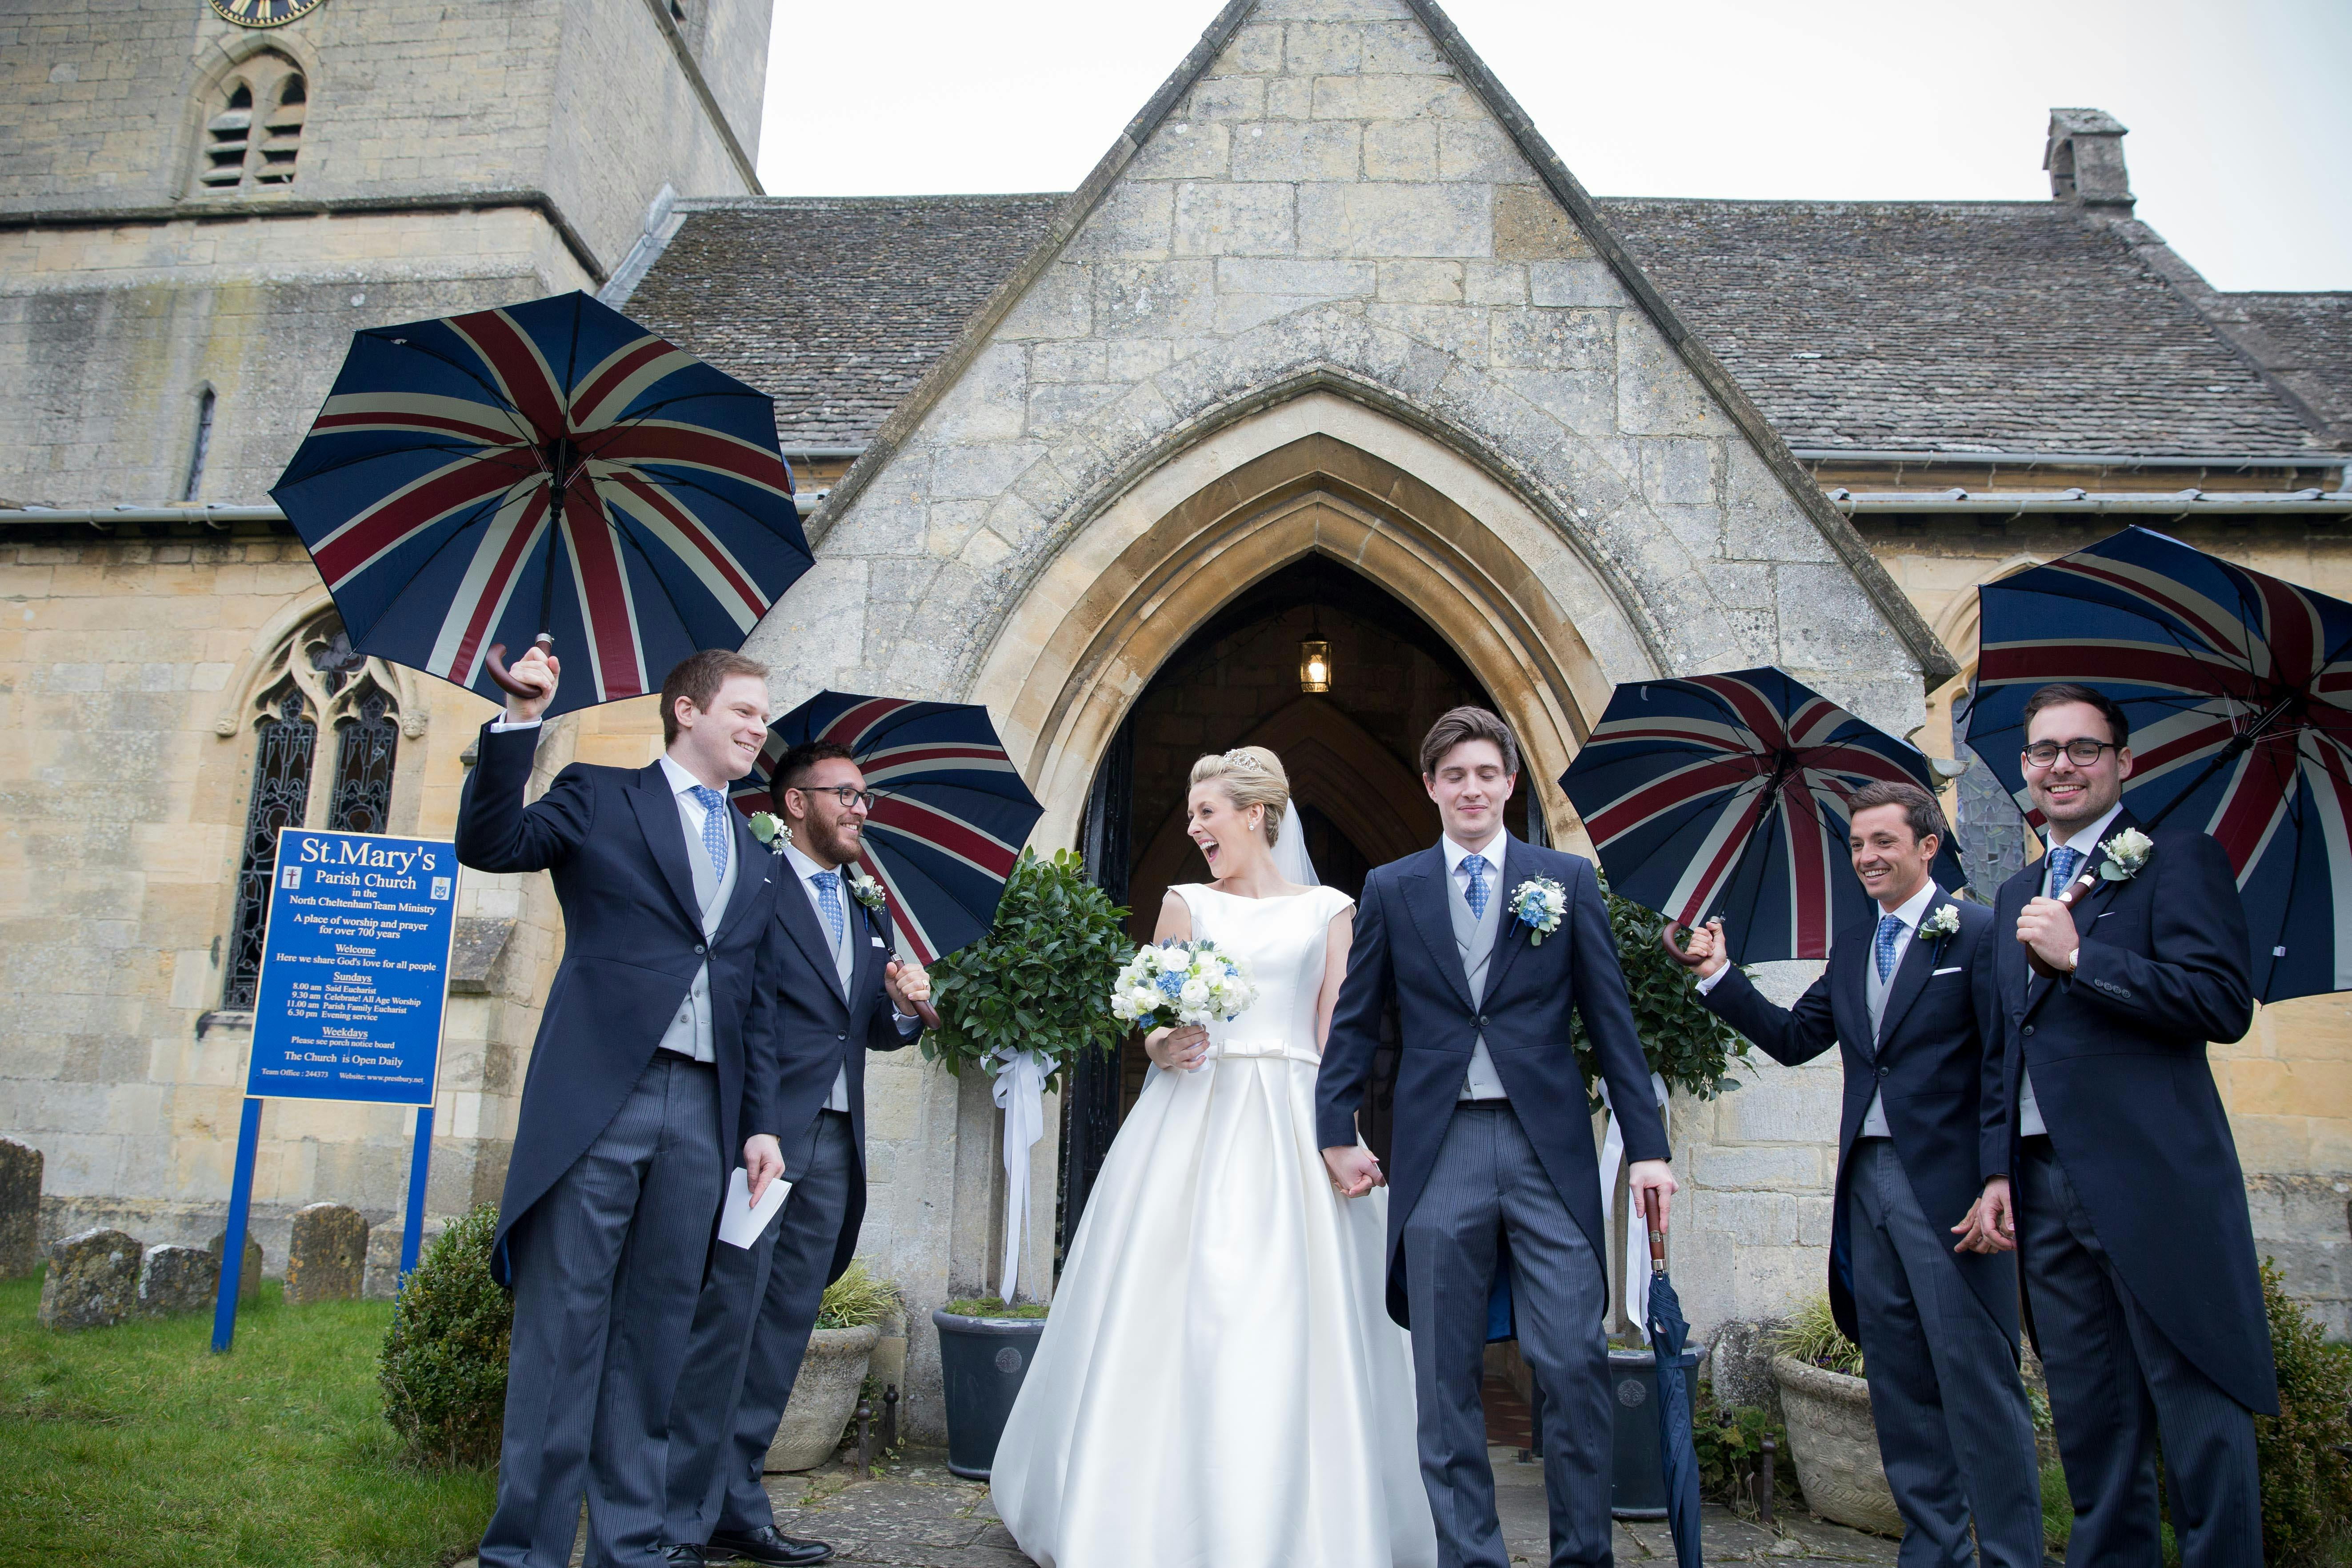 A Very English Wedding at Sudeley Castle in Winchcombe, UK With British-Style Umbrella Photo Op | PartySlate